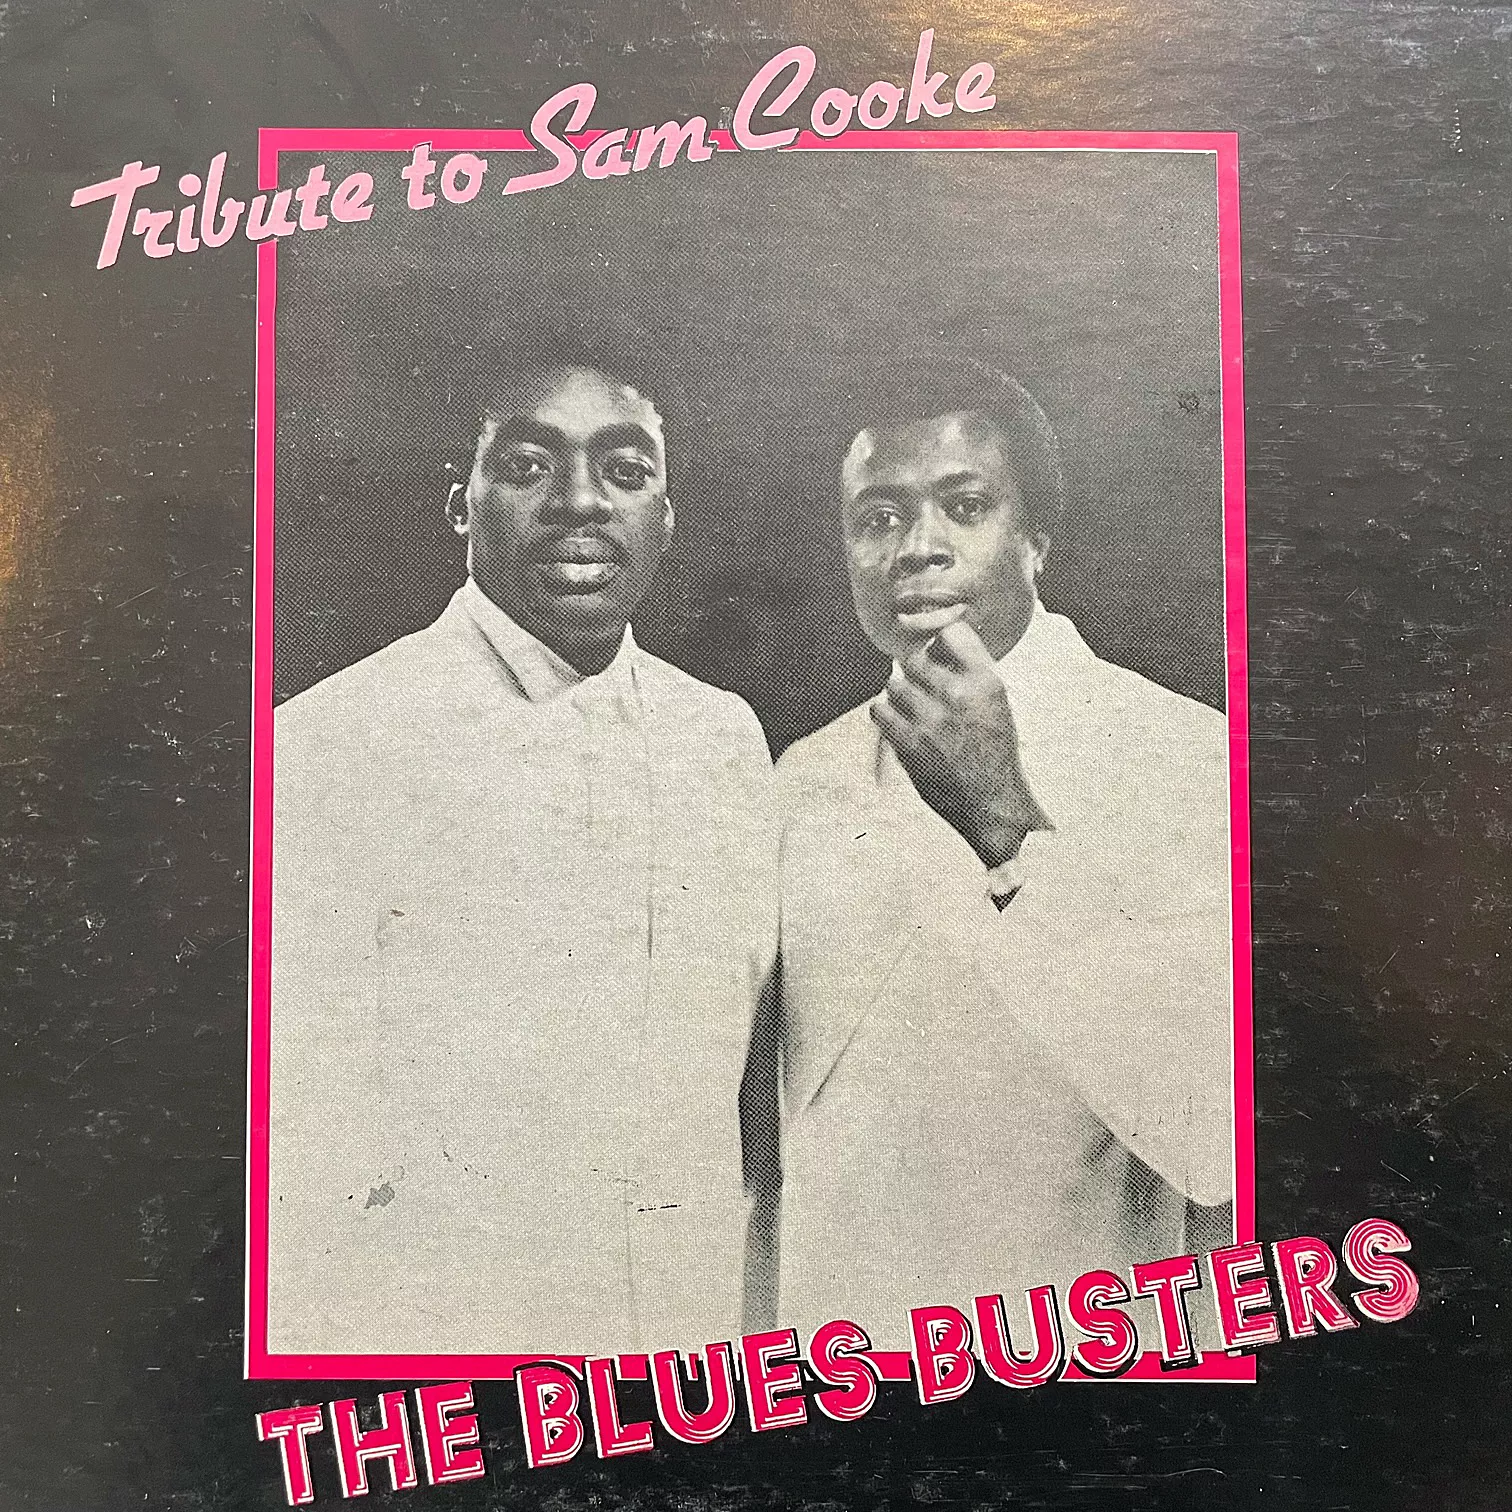 BLUES BUSTERS / TRIBUTE TO SAM COOKE